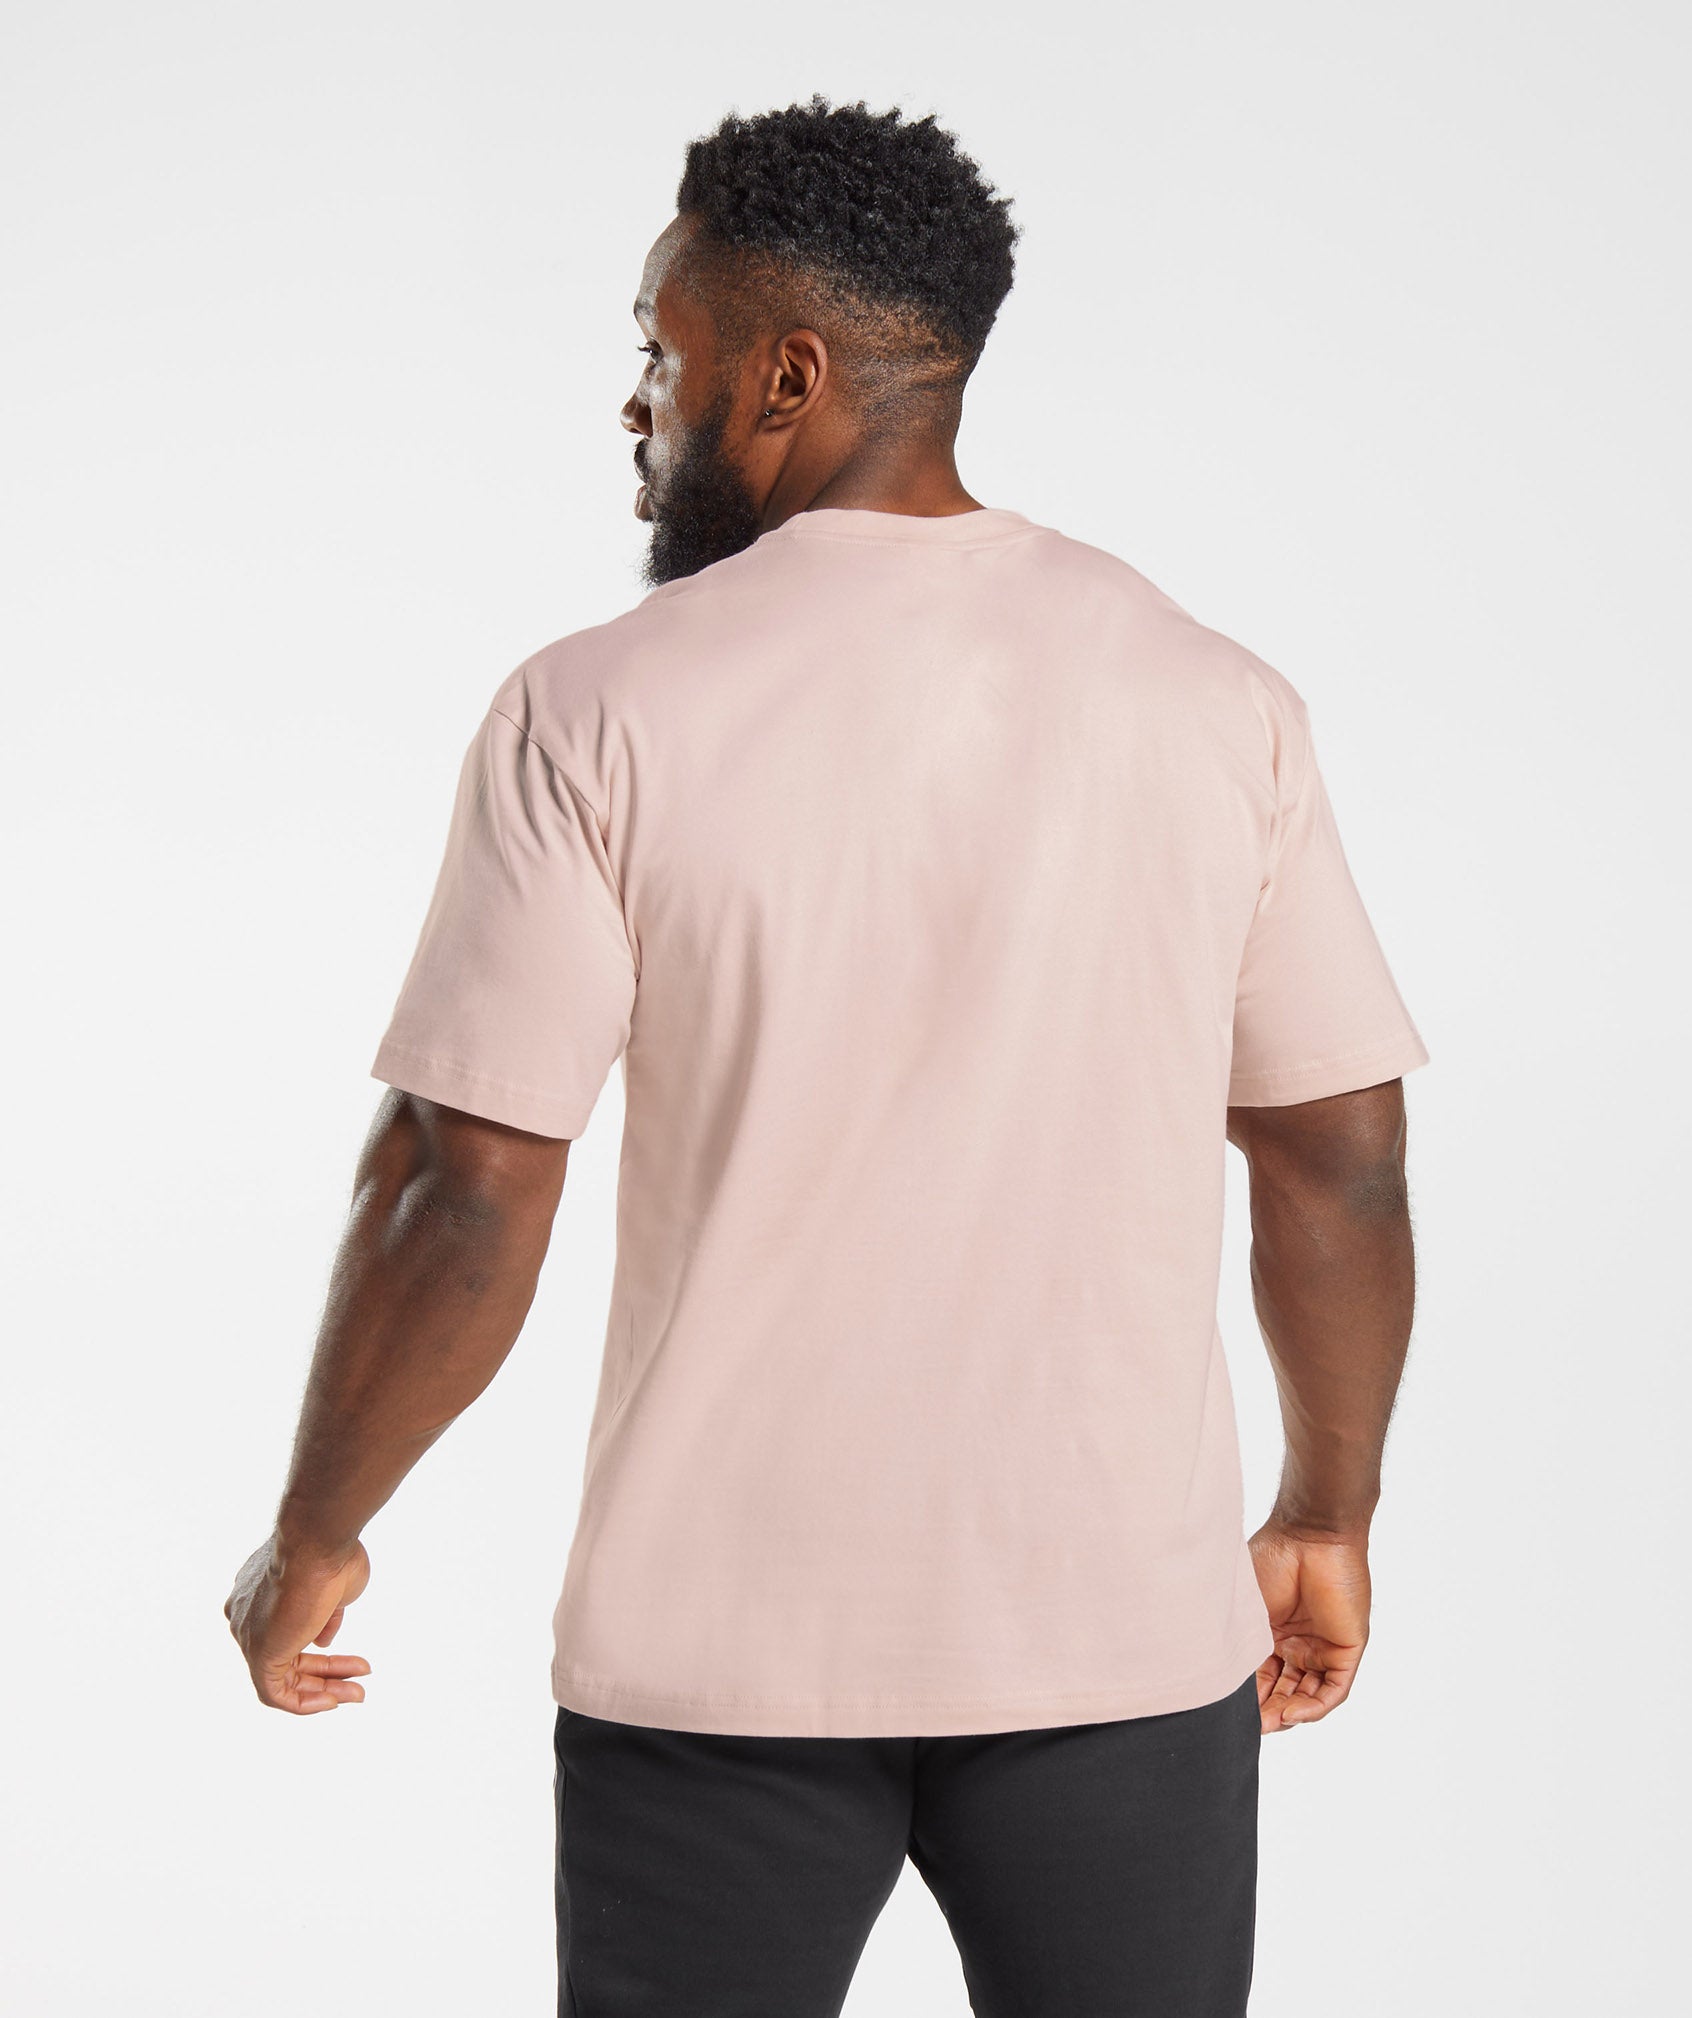 Apollo Oversized T-Shirt in Misty Pink